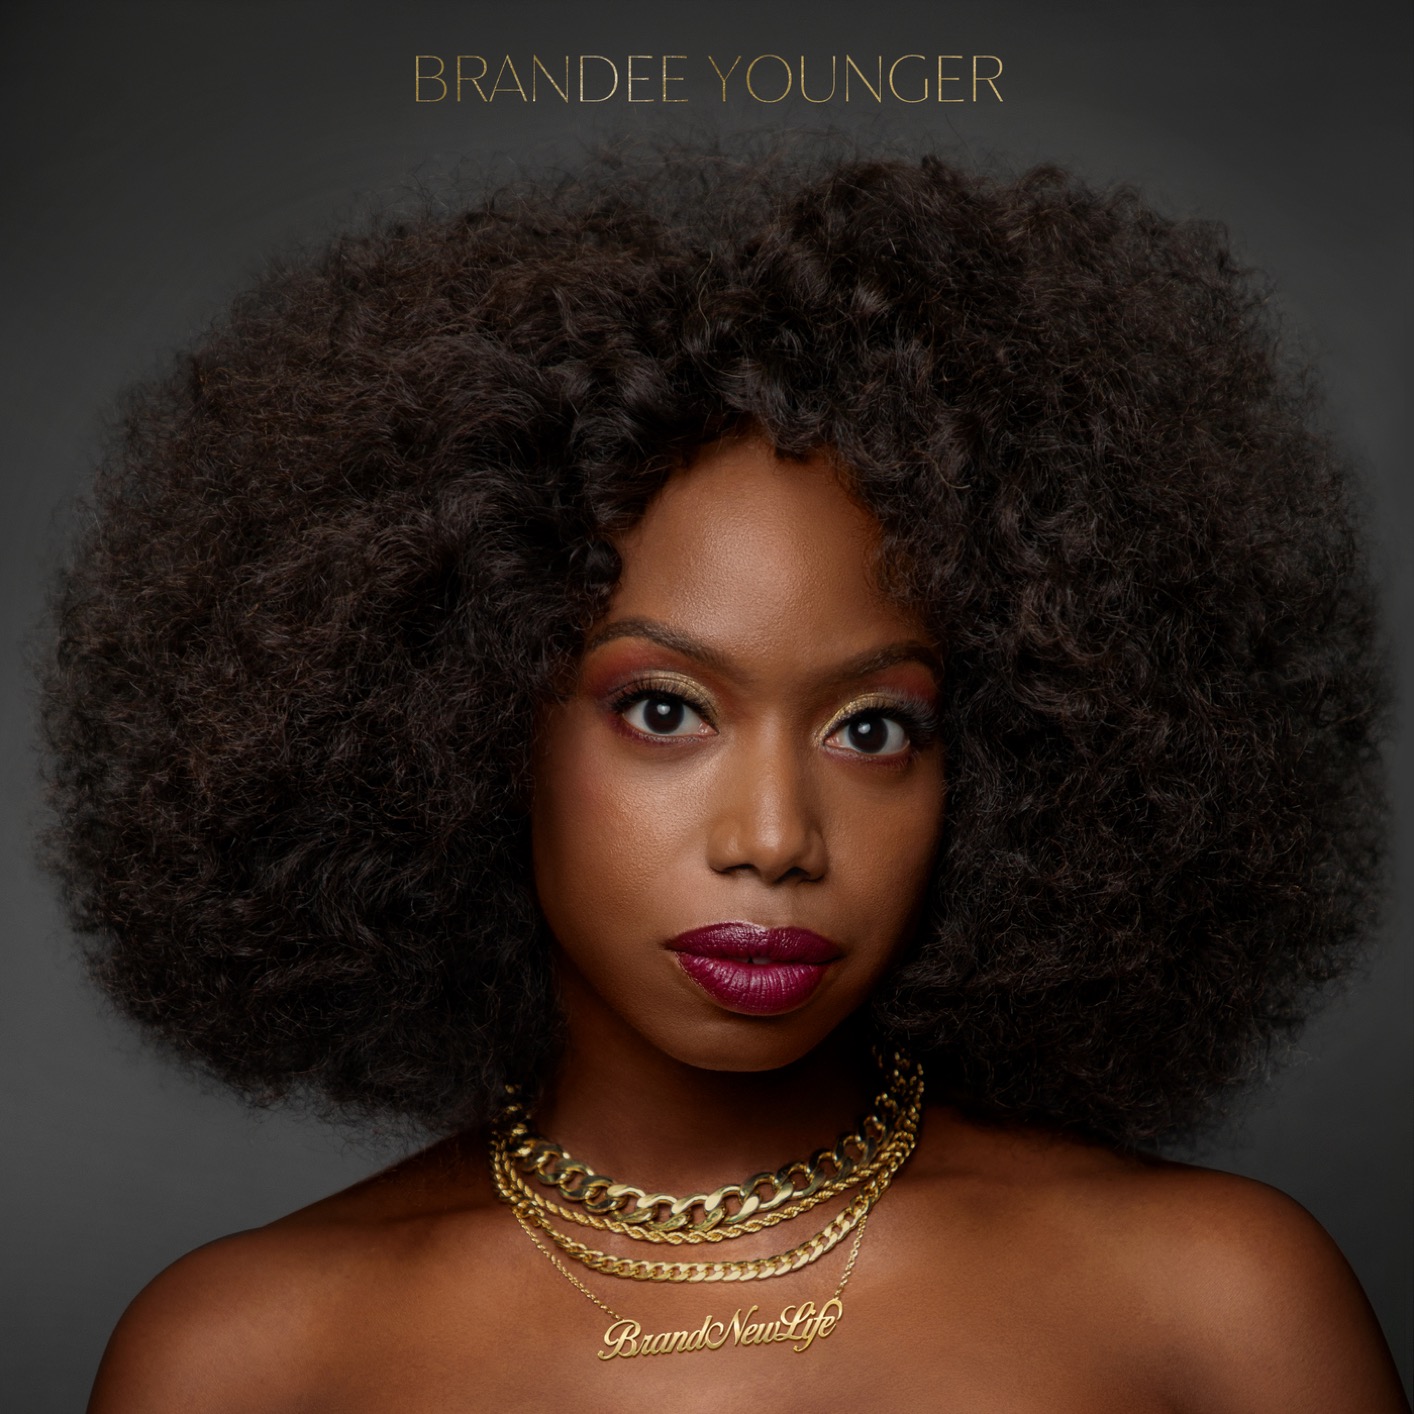 Brandee Younger – Brand New Life